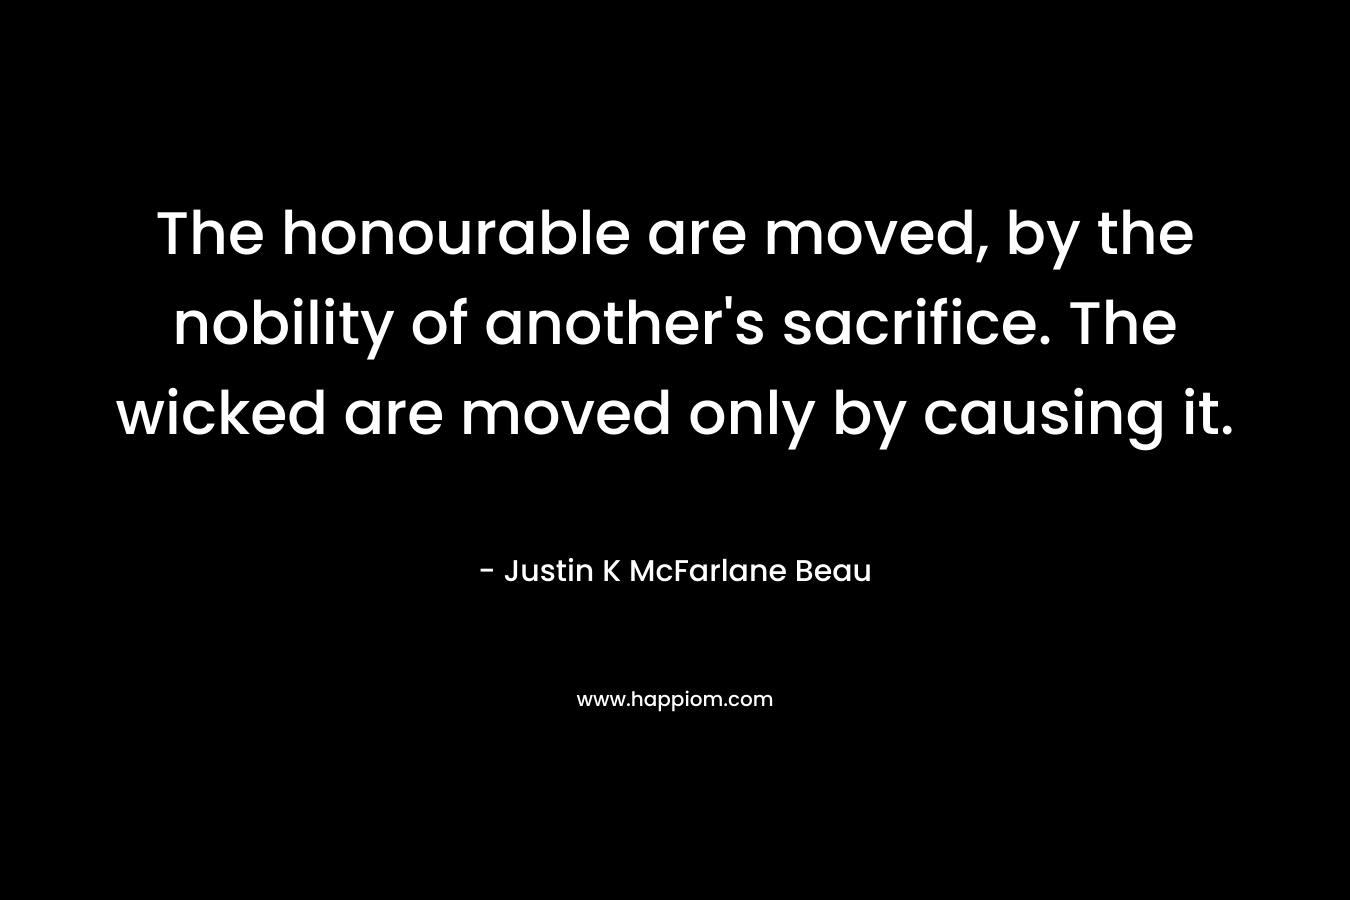 The honourable are moved, by the nobility of another’s sacrifice. The wicked are moved only by causing it. – Justin K McFarlane Beau